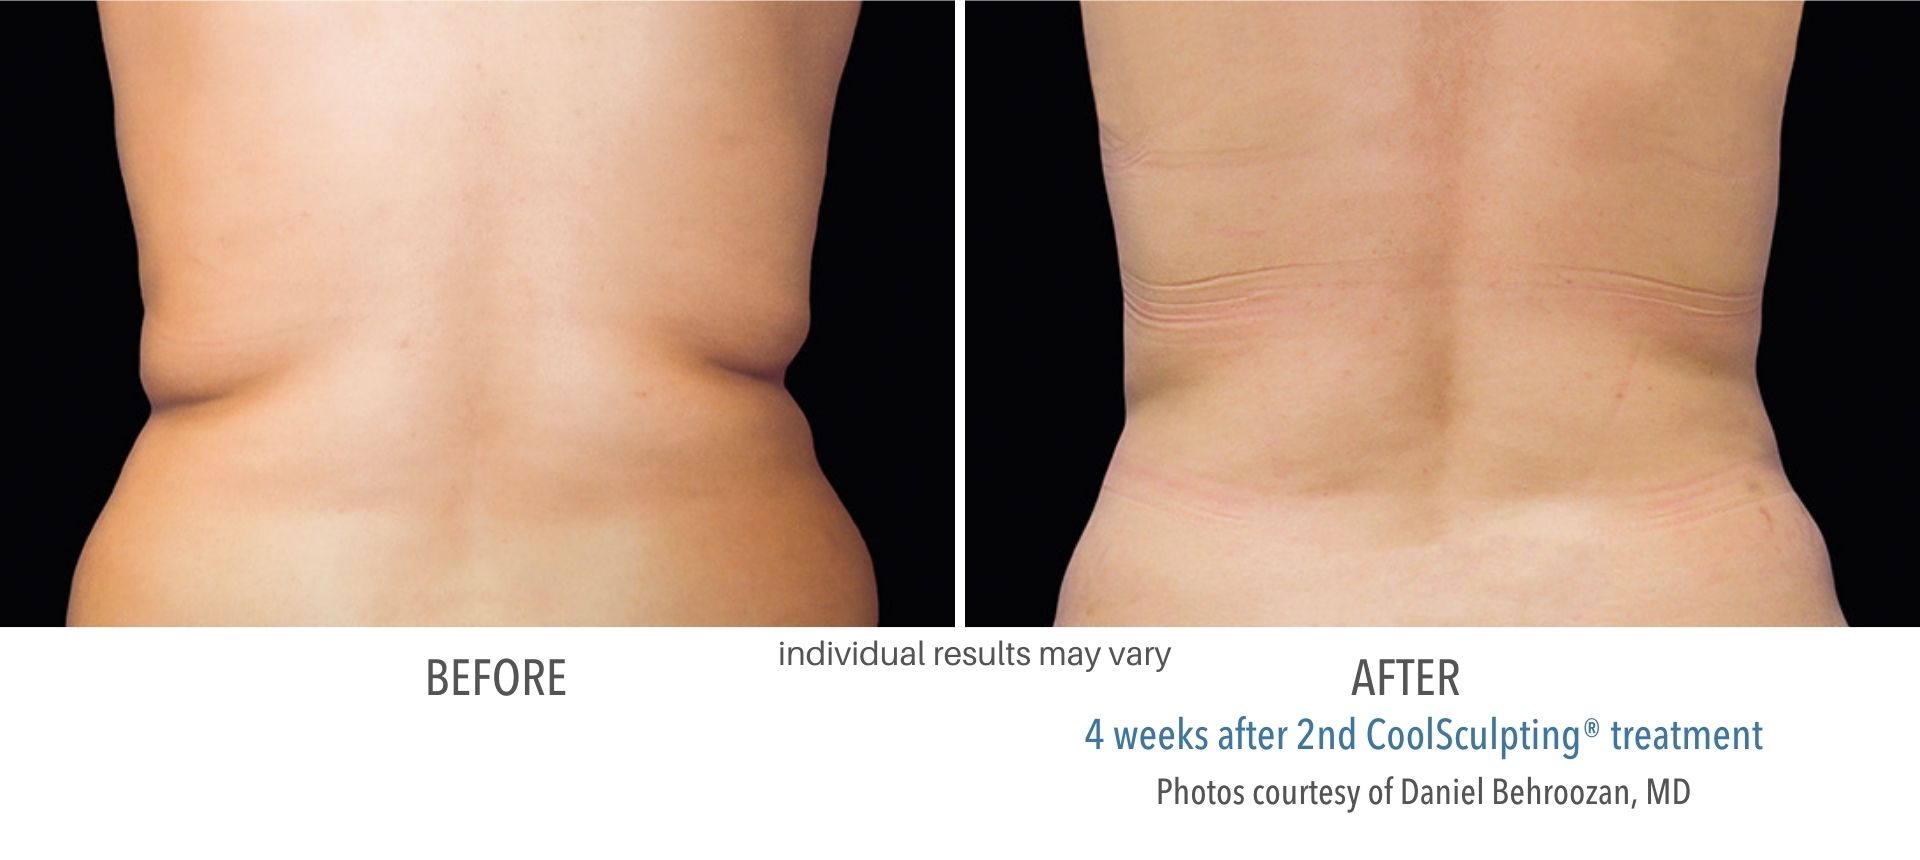 Back flanks showing before and after results from CoolSculpting fat freezing treatment at Haus of Aesthetics.